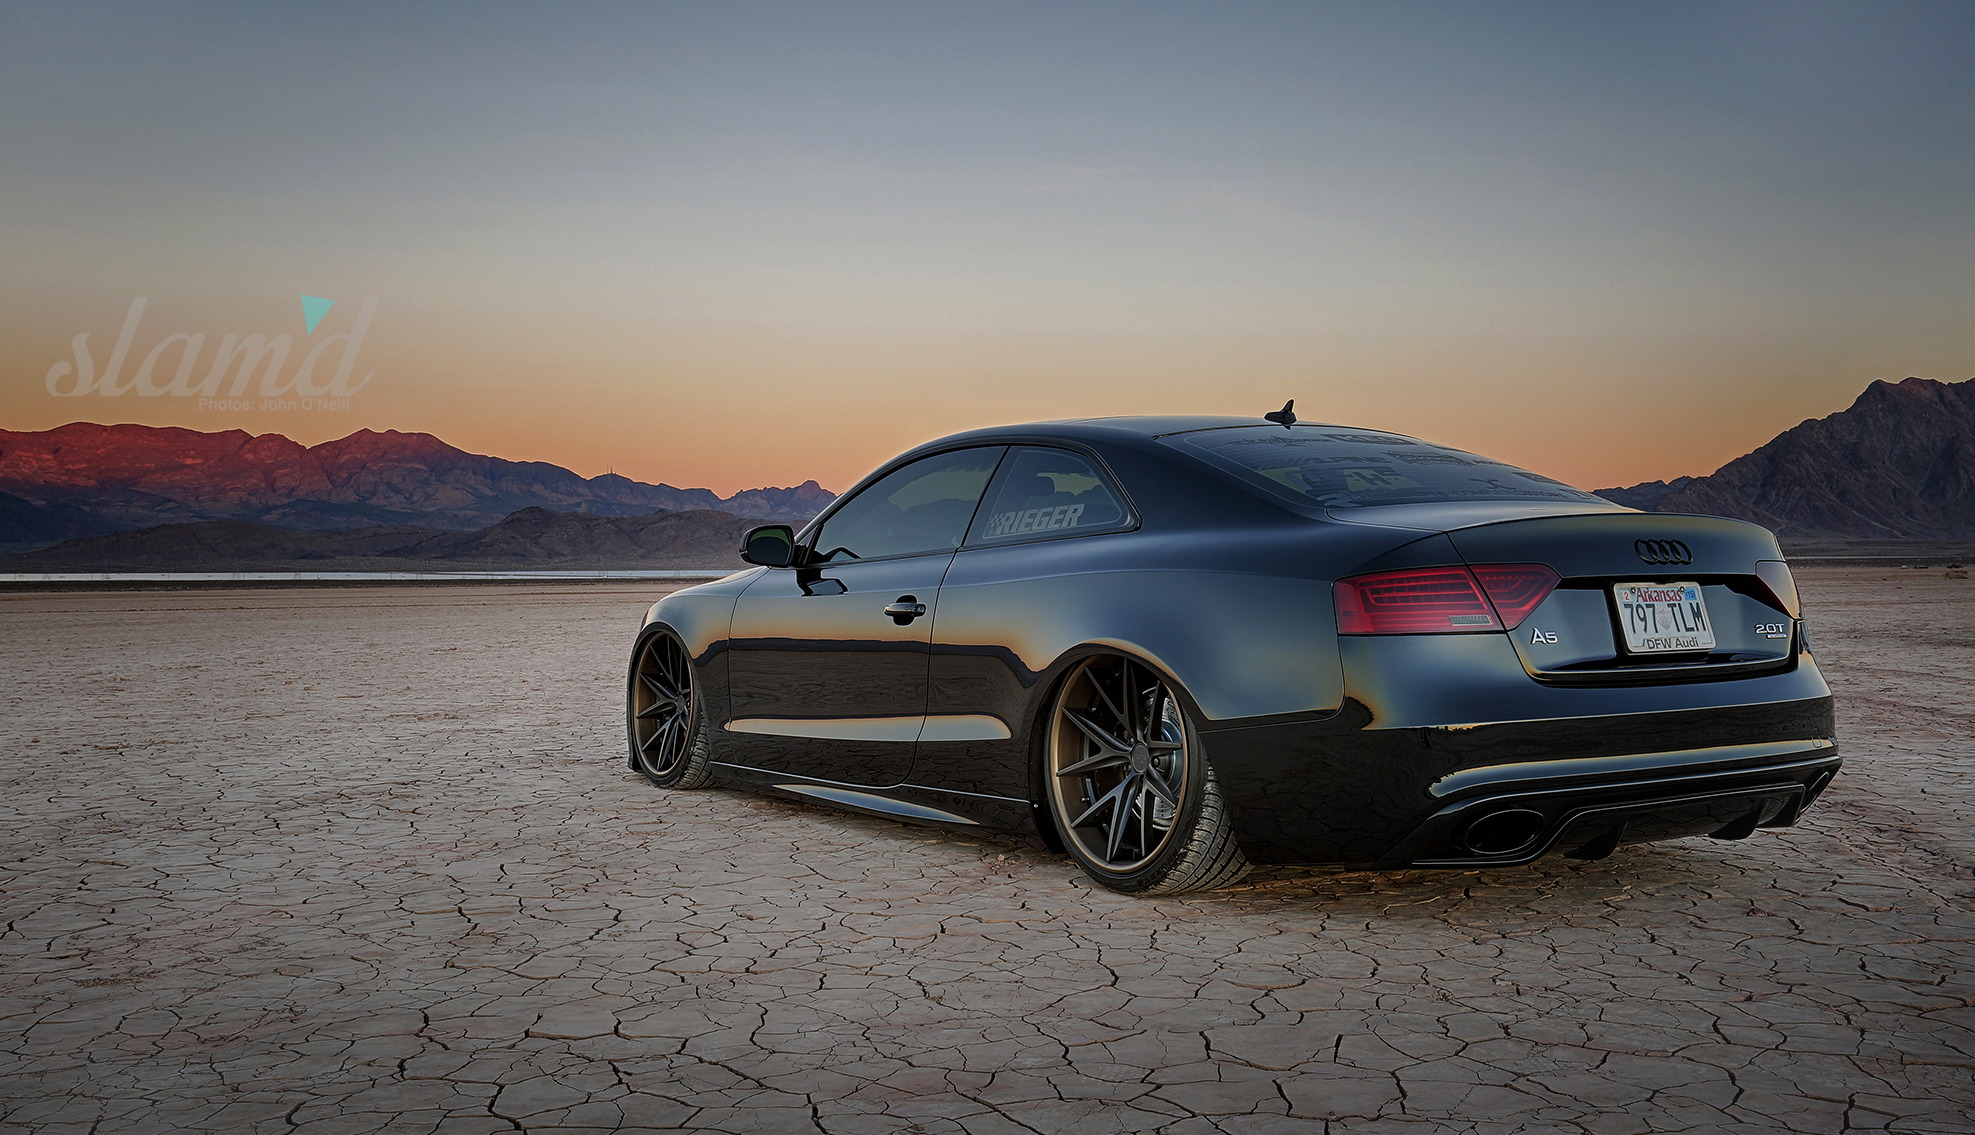 Audi-A5-Sportback-by-Rieger-Tuning-10 - Audi Tuning Mag